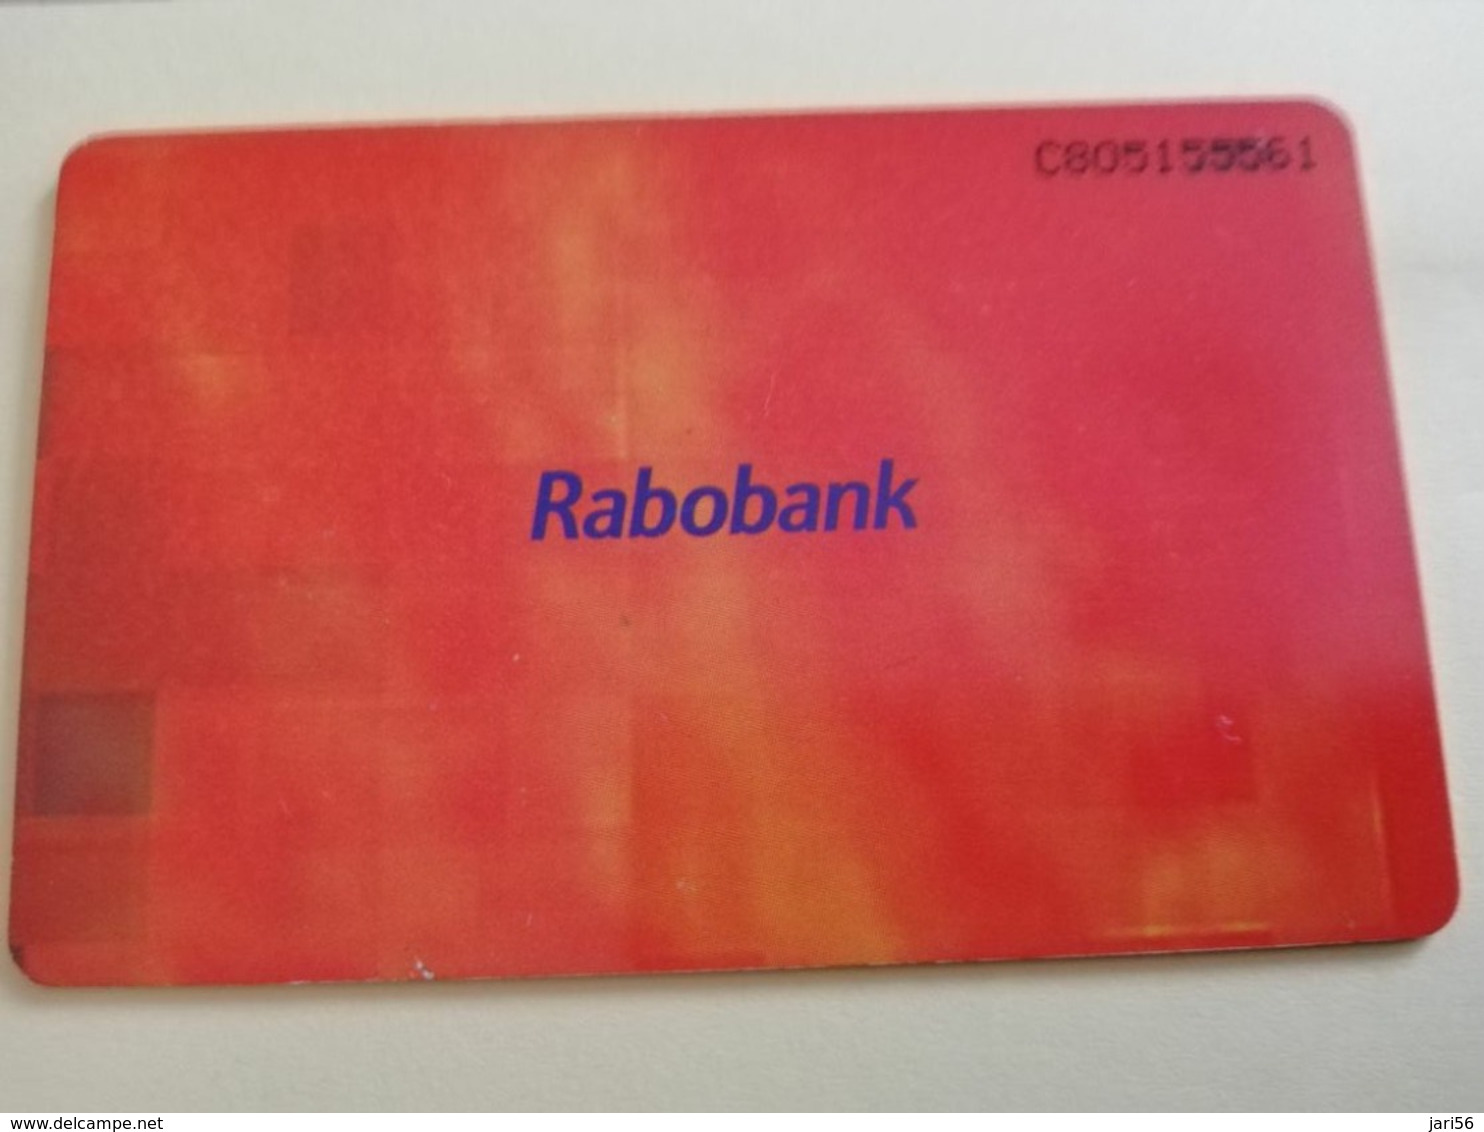 NETHERLANDS  ADVERTISING CHIPCARD HFL 2,50 CRD 132.04 RABOBANK    Fine Used   ** 3169** - Private